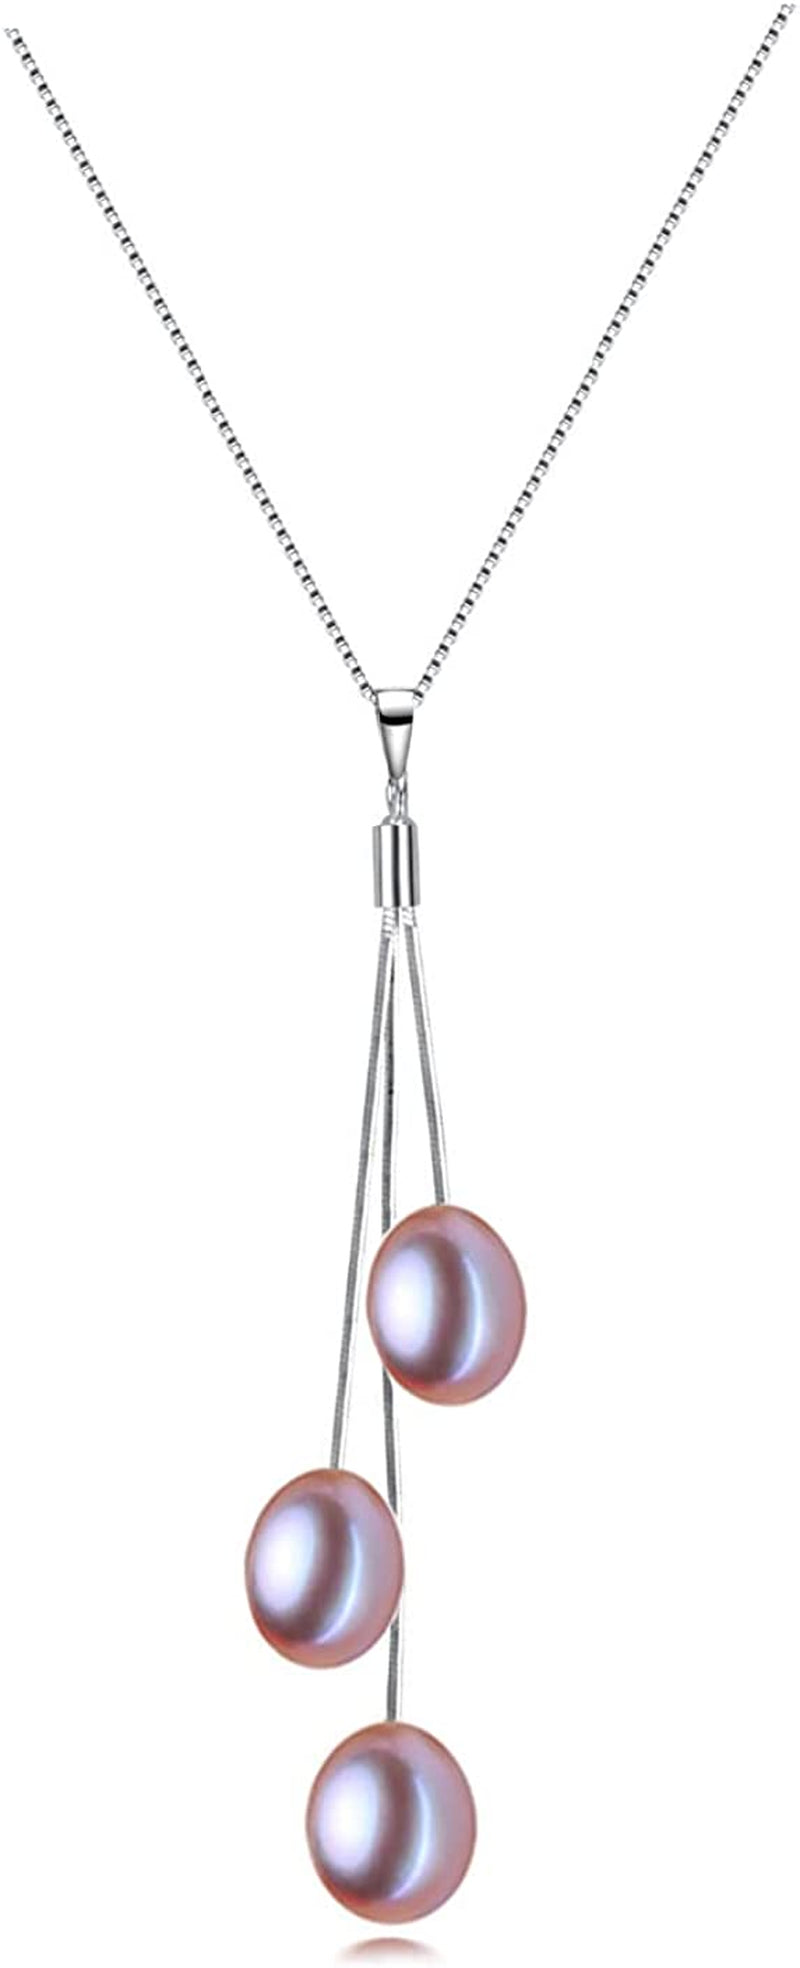 Elegant Pink Freshwater Cultured Pearl Pendant Necklace AAAA Quality with Sterling Silver Chain 18" (6.5X8Mm) - Premiumpearl